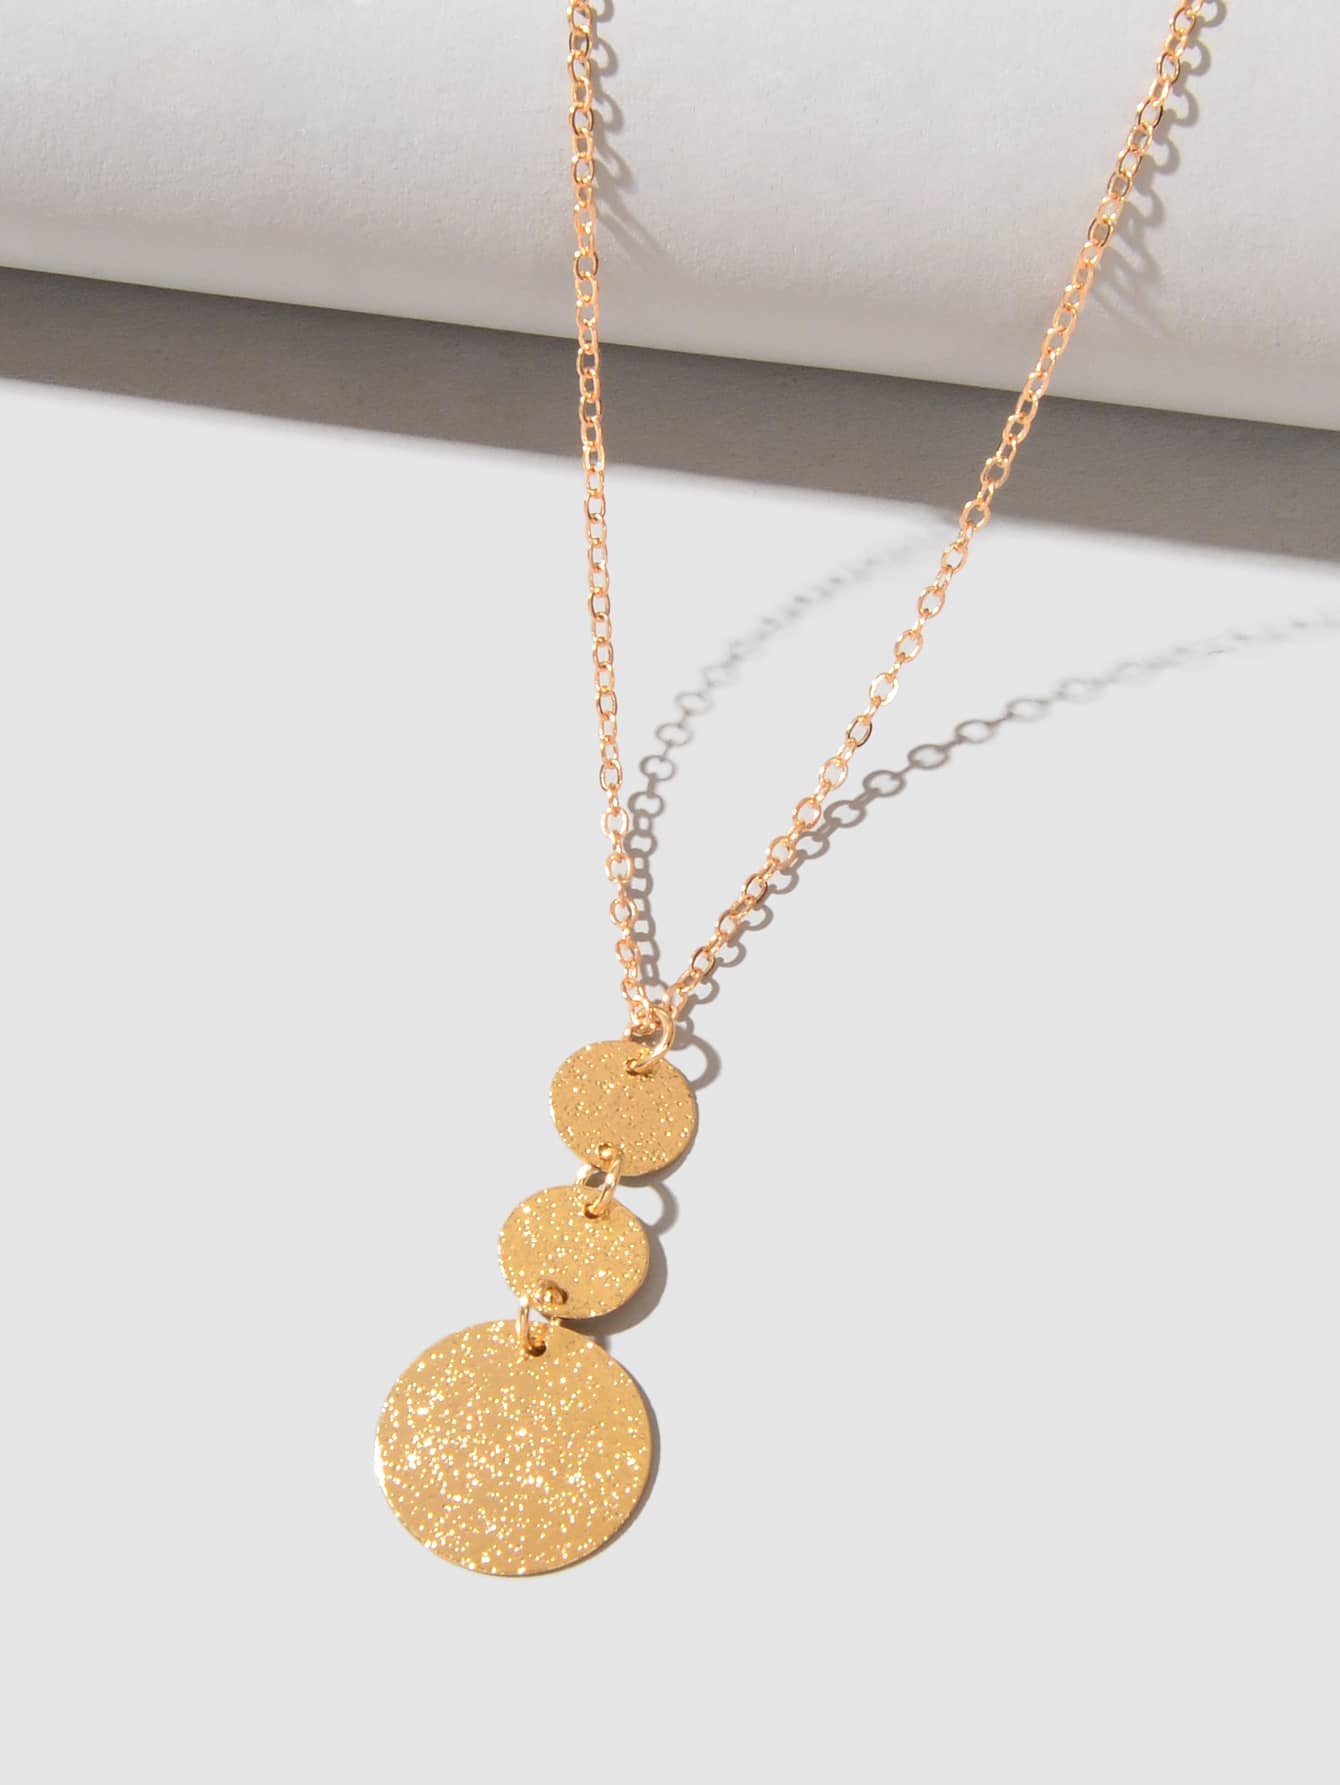 1Pc Fashion Disc Charm Necklace for Women for Daily Life